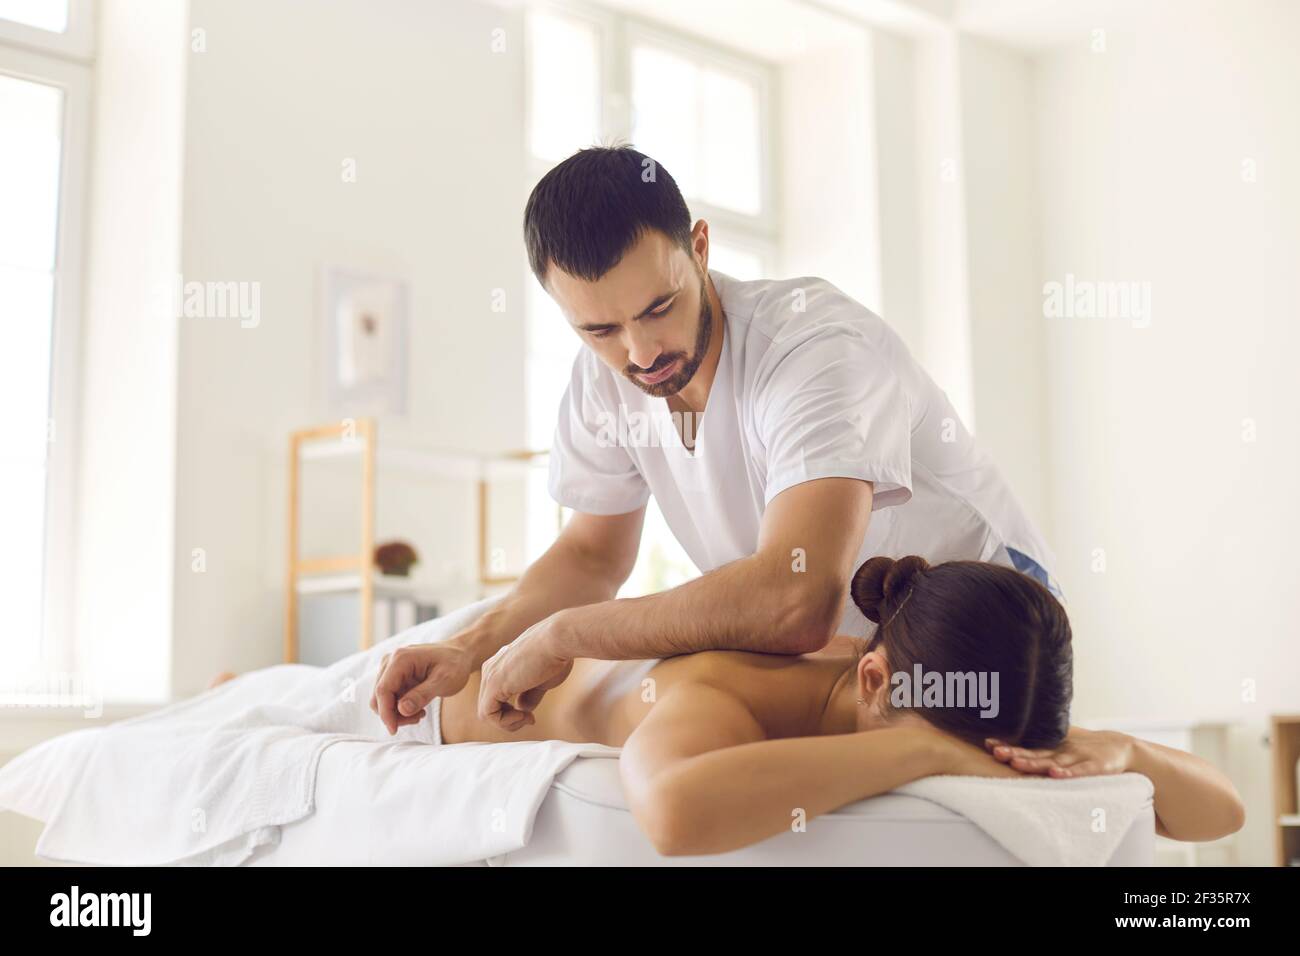 Massage bodycare in medical clinic from professional doctor masseur Stock Photo